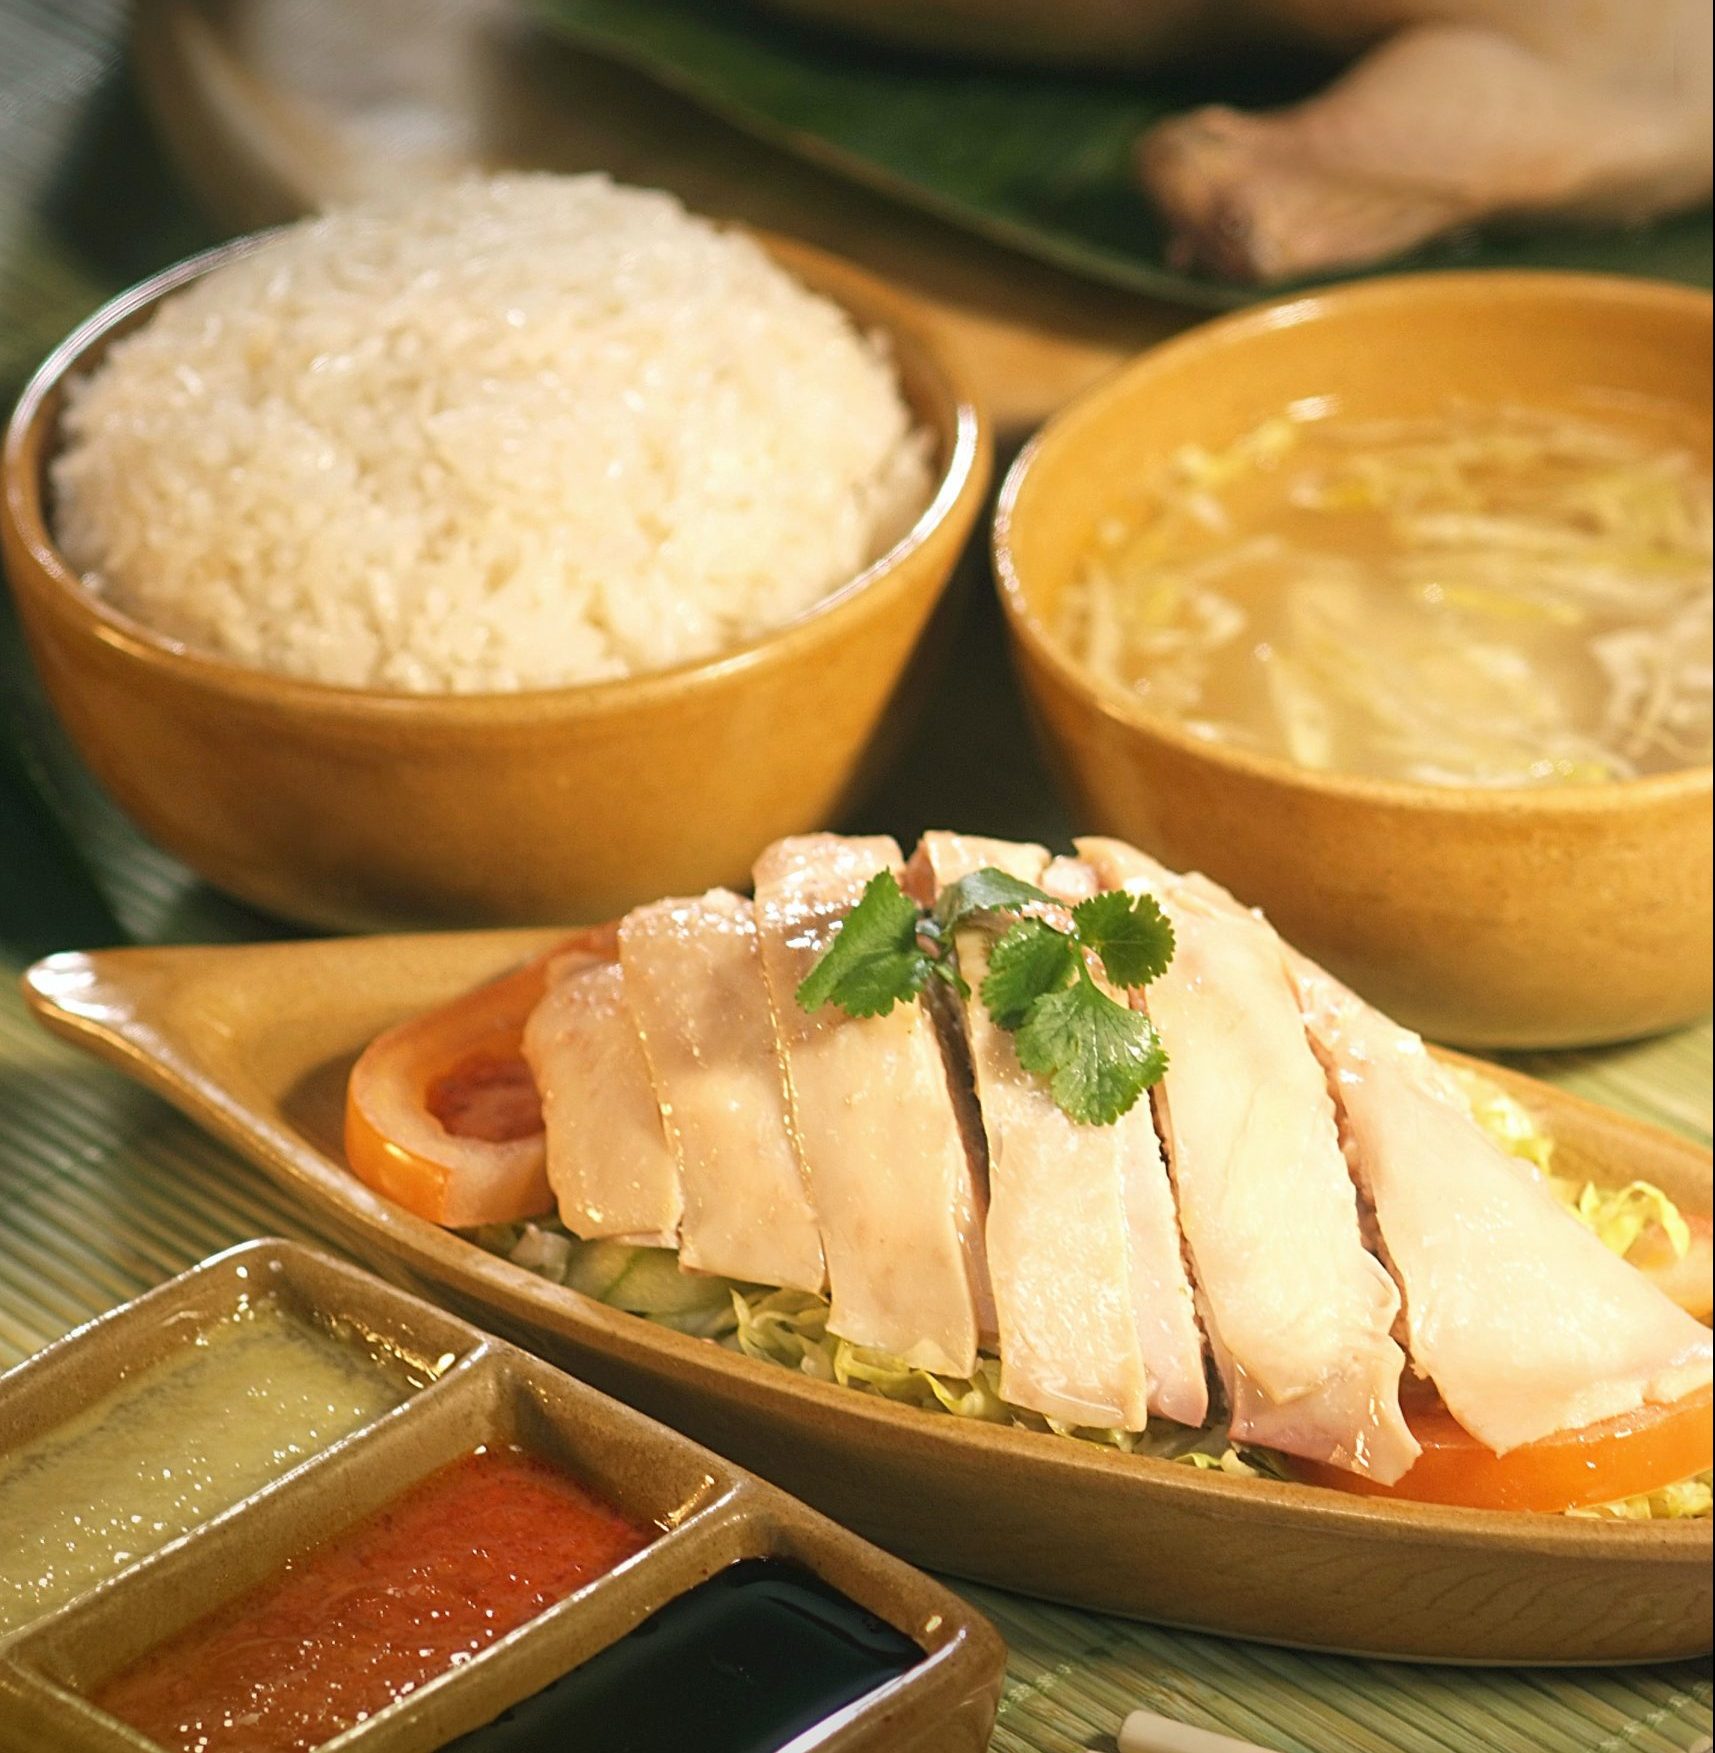 Chicken rice prepared using chickens fed with cannabis have been well-received by customers. Image credit: Photo by min che via Pexels